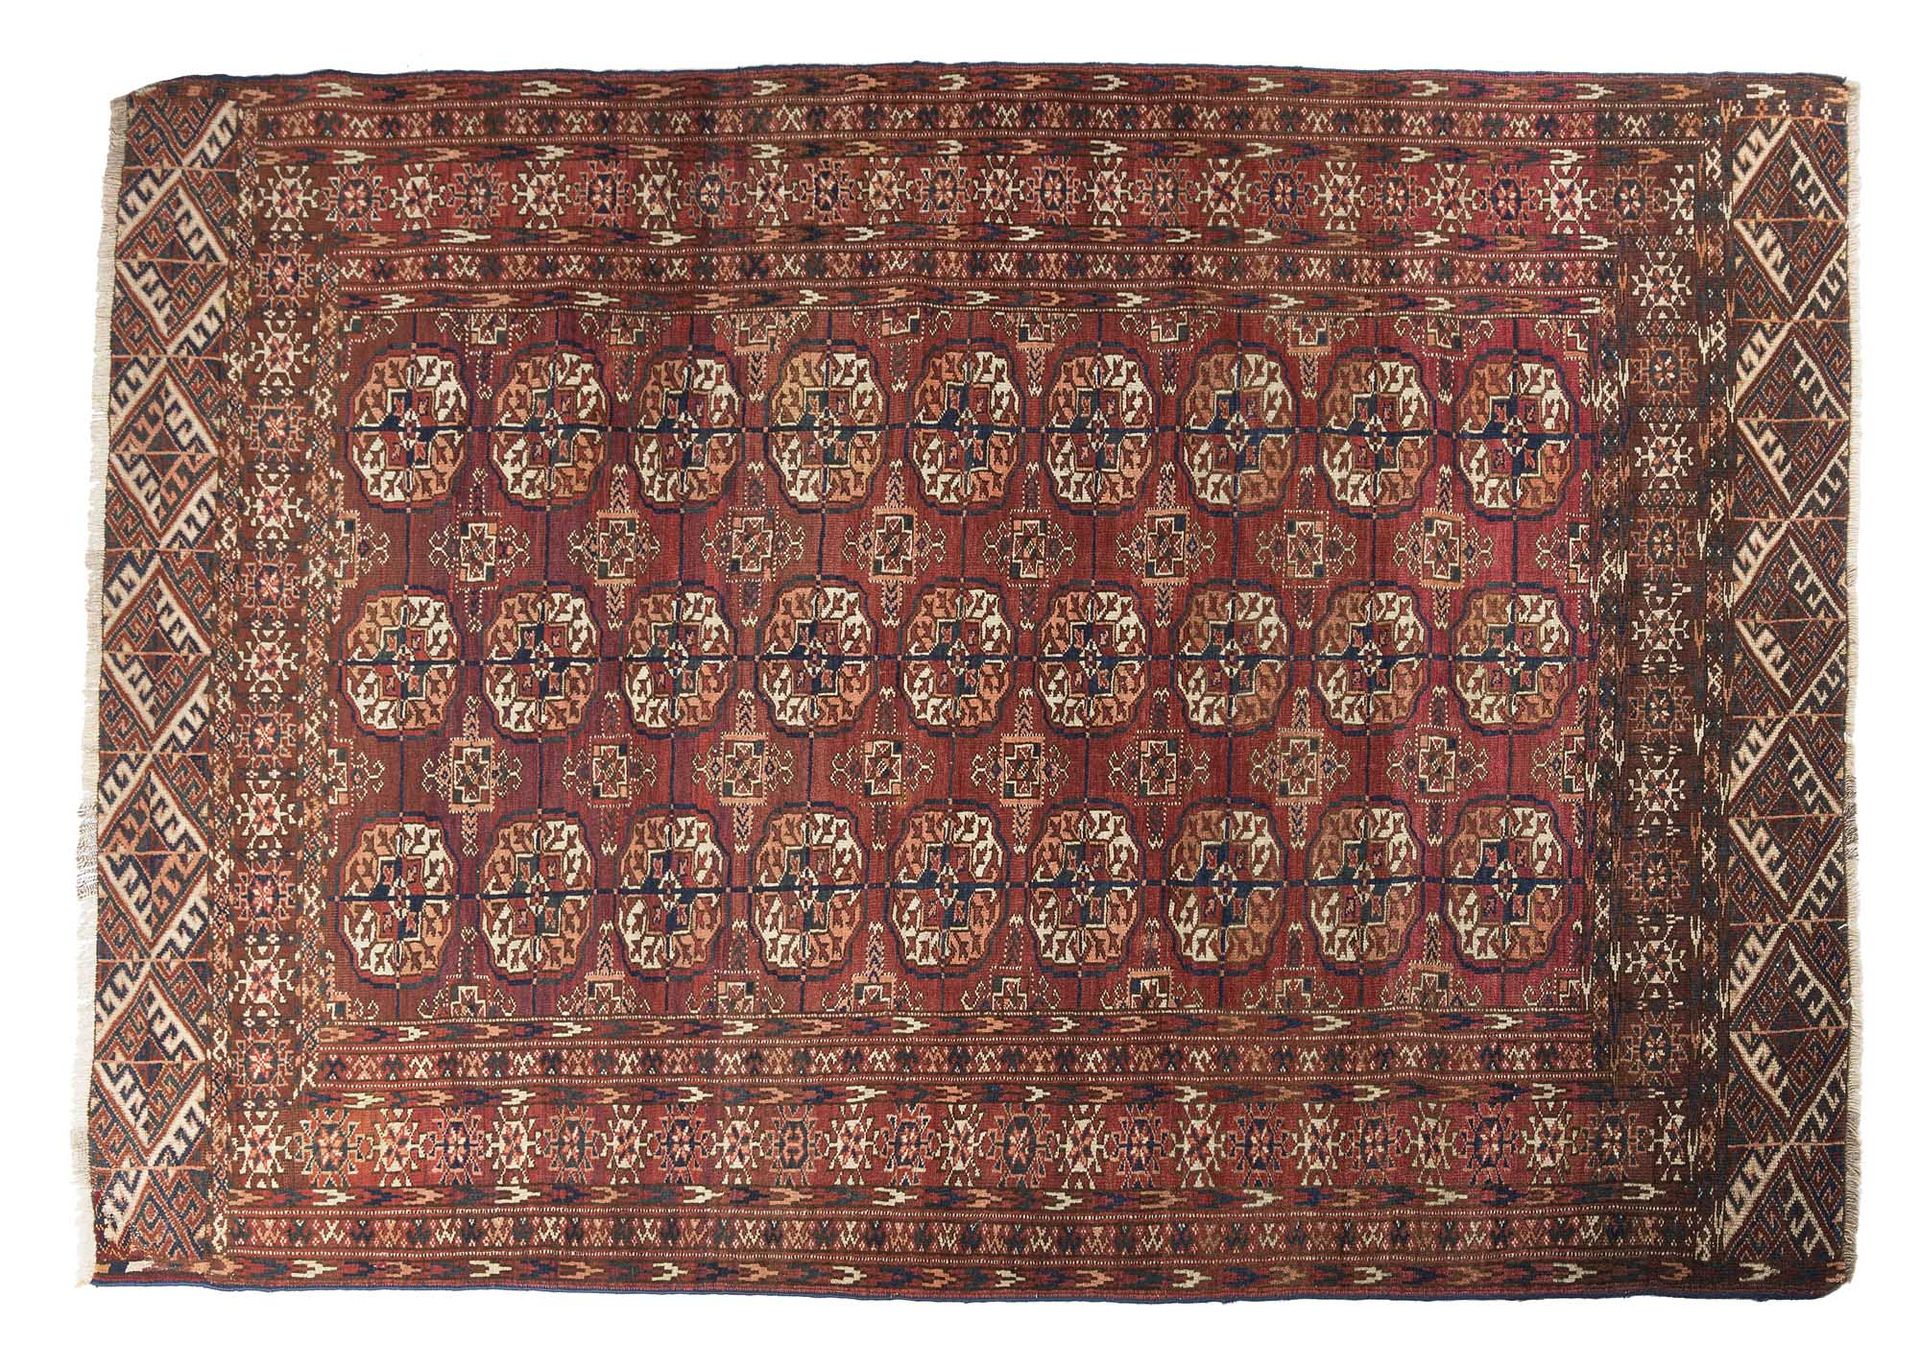 Null BOUKHARA carpet (Central Asia), late 19th century

Dimensions : 195 x 130cm&hellip;